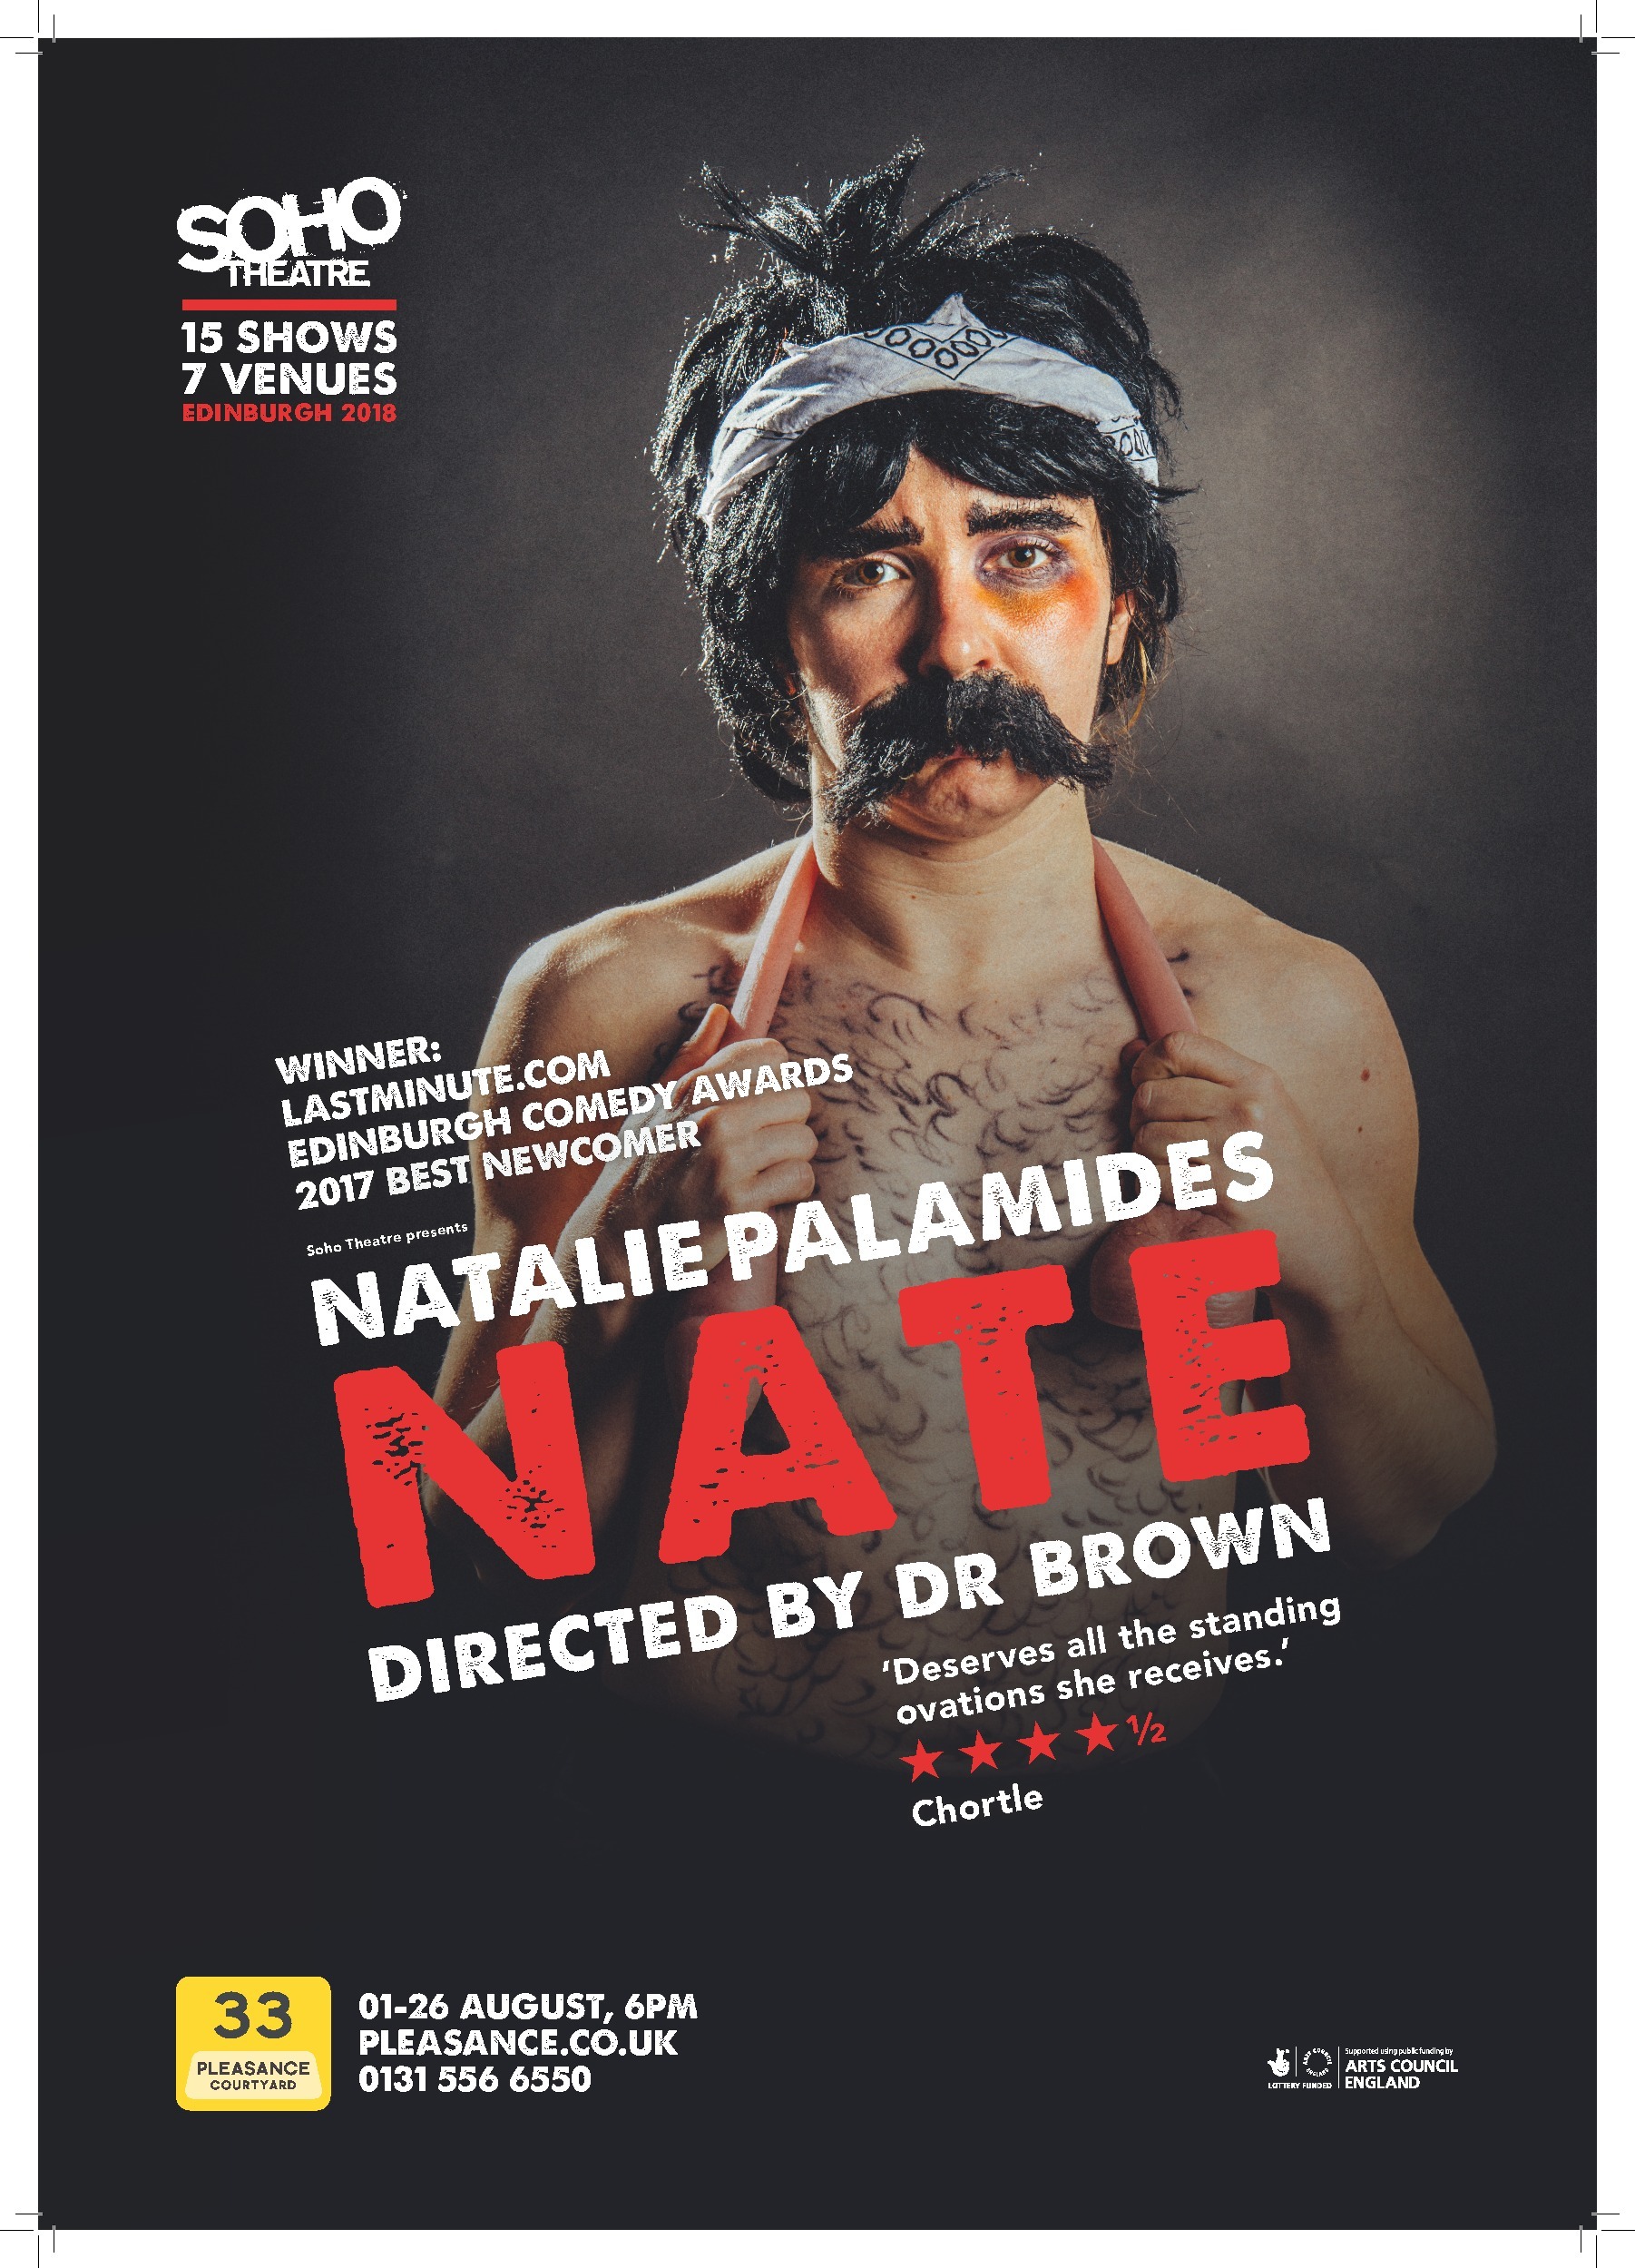 The poster for Natalie Palamides: Nate